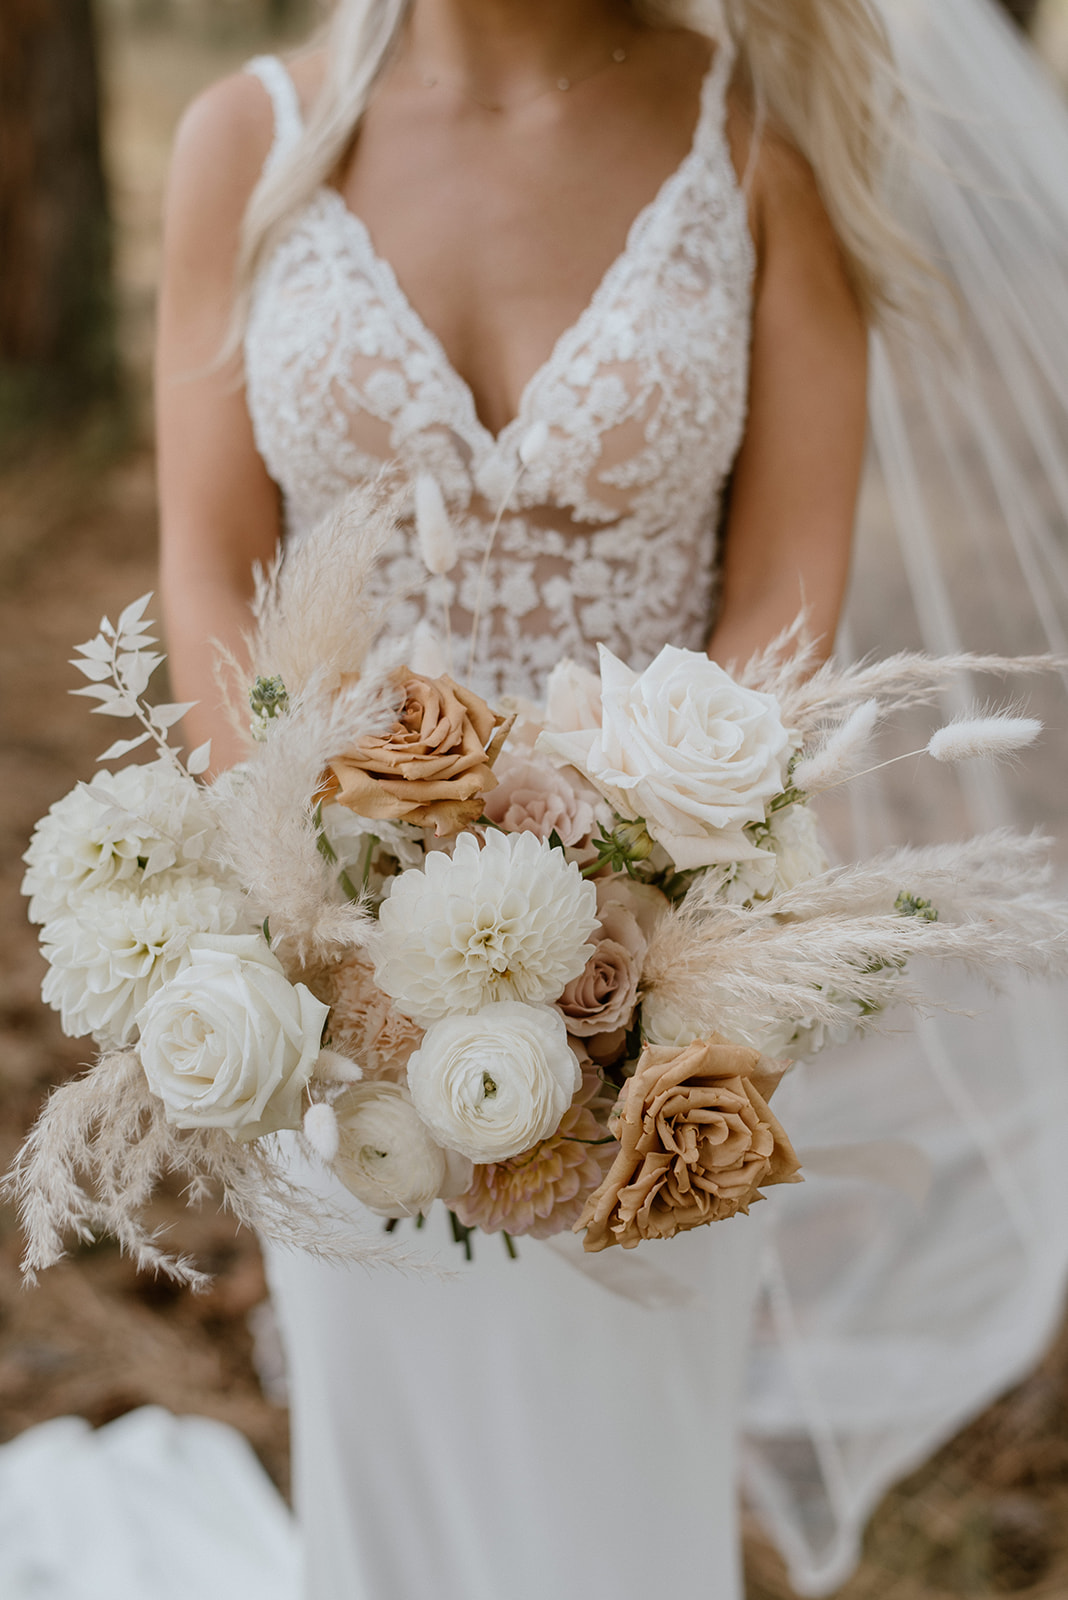 Boho wedding bouquet with toffee roses and white dahlias